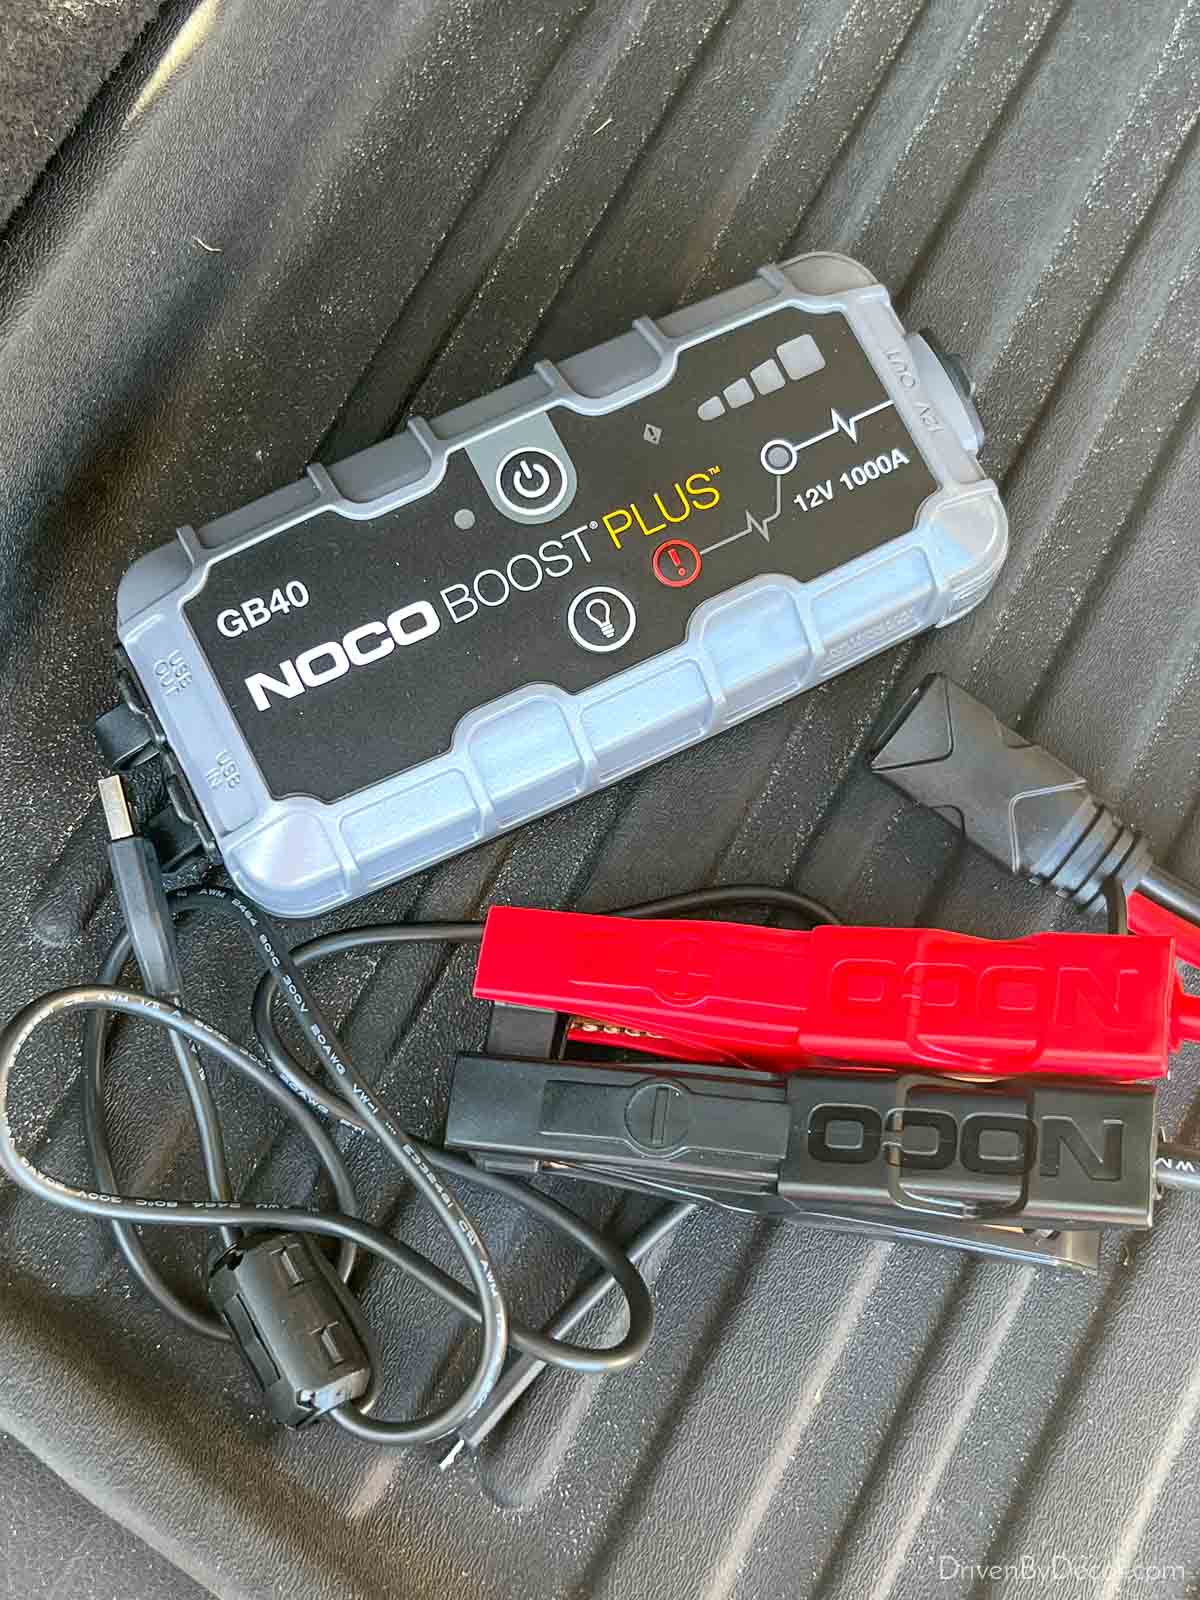 This portable jump starter is a great Christmas gift for anyone - allowing you to jumpstart your own car!